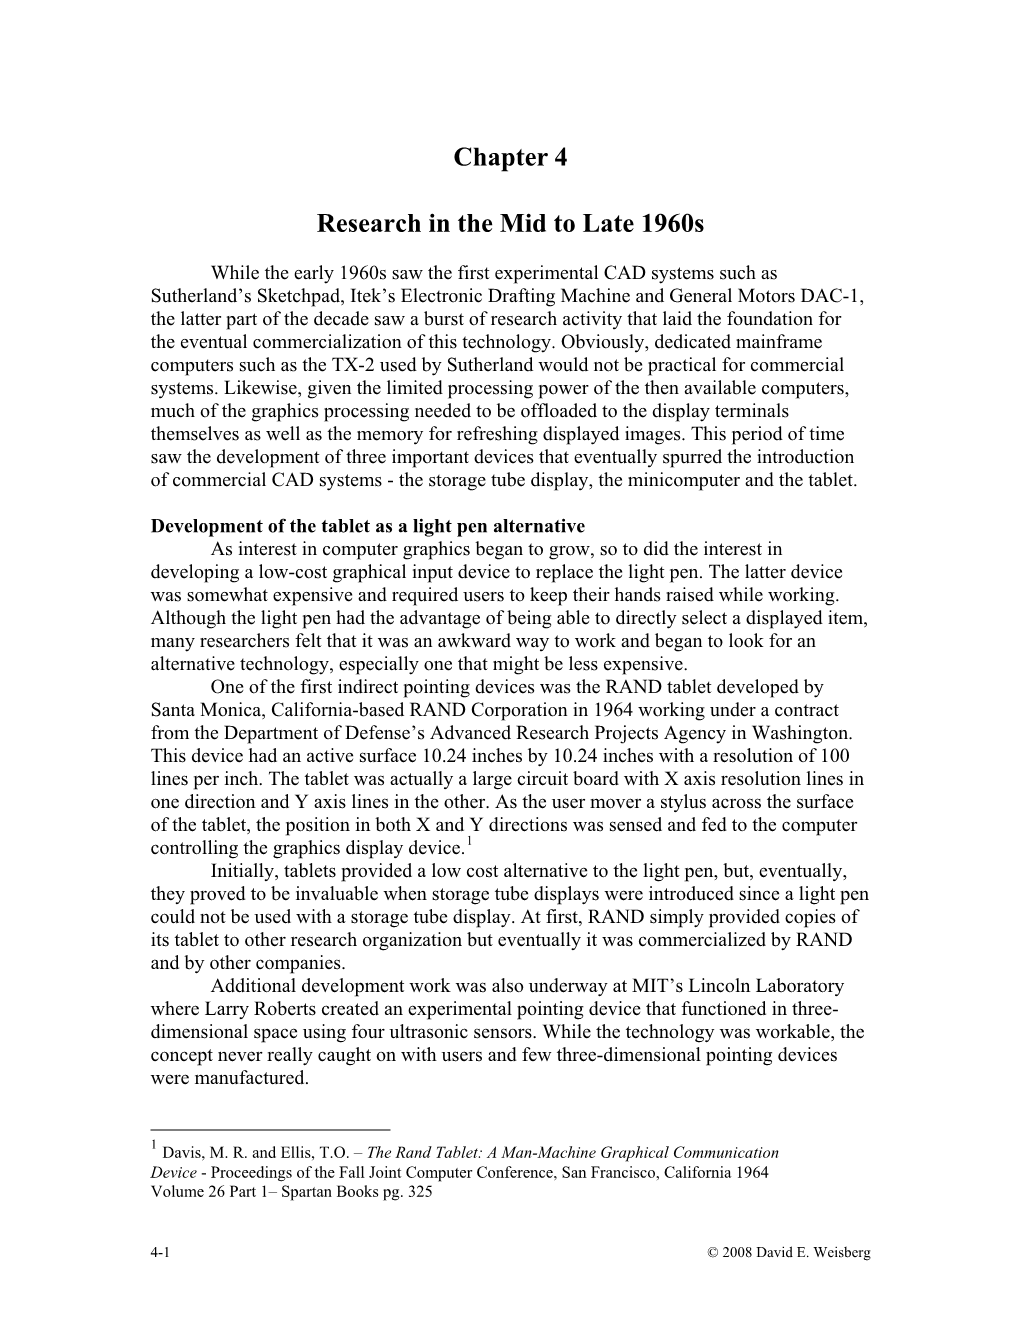 4 Research in the Second Half of the 1960S